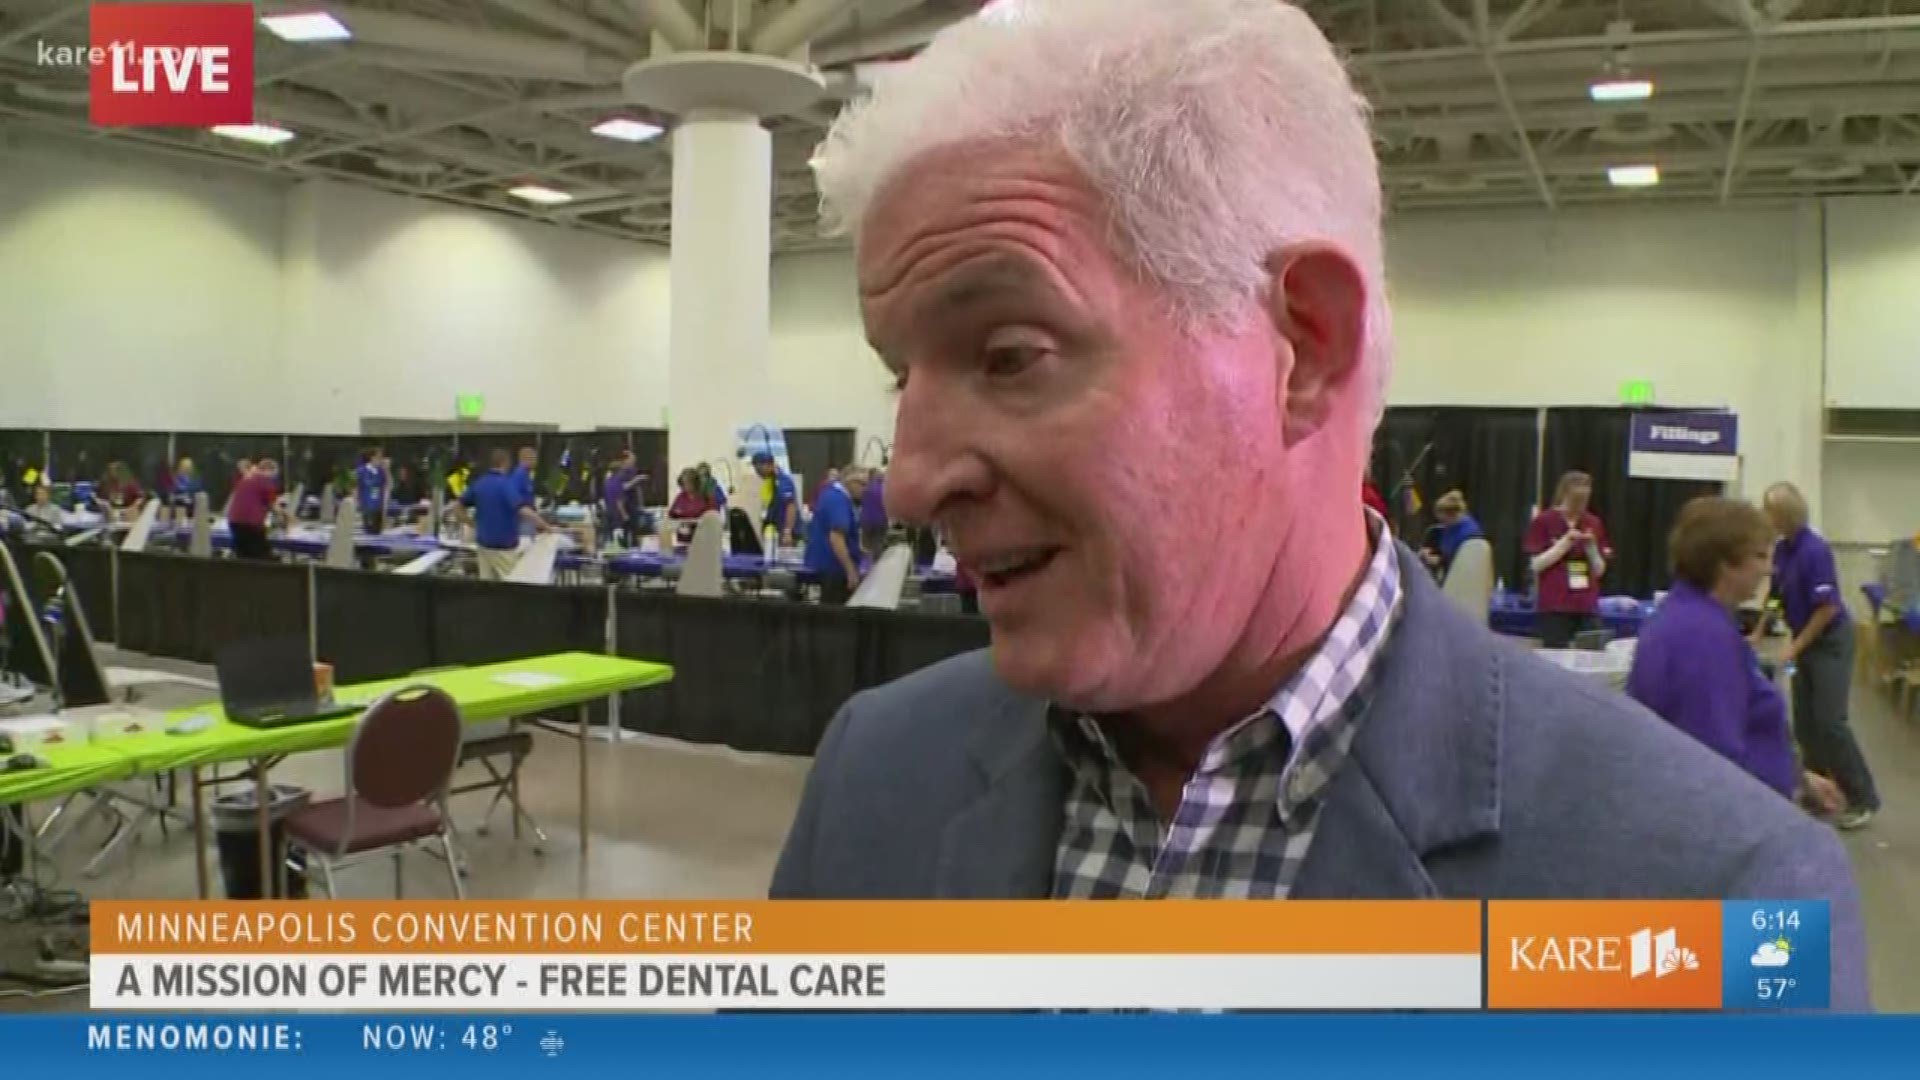 For two days, dentists will volunteer to provide free dental work to Minnesotans through the Mission of Mercy. https://kare11.tv/2Nsk5zG